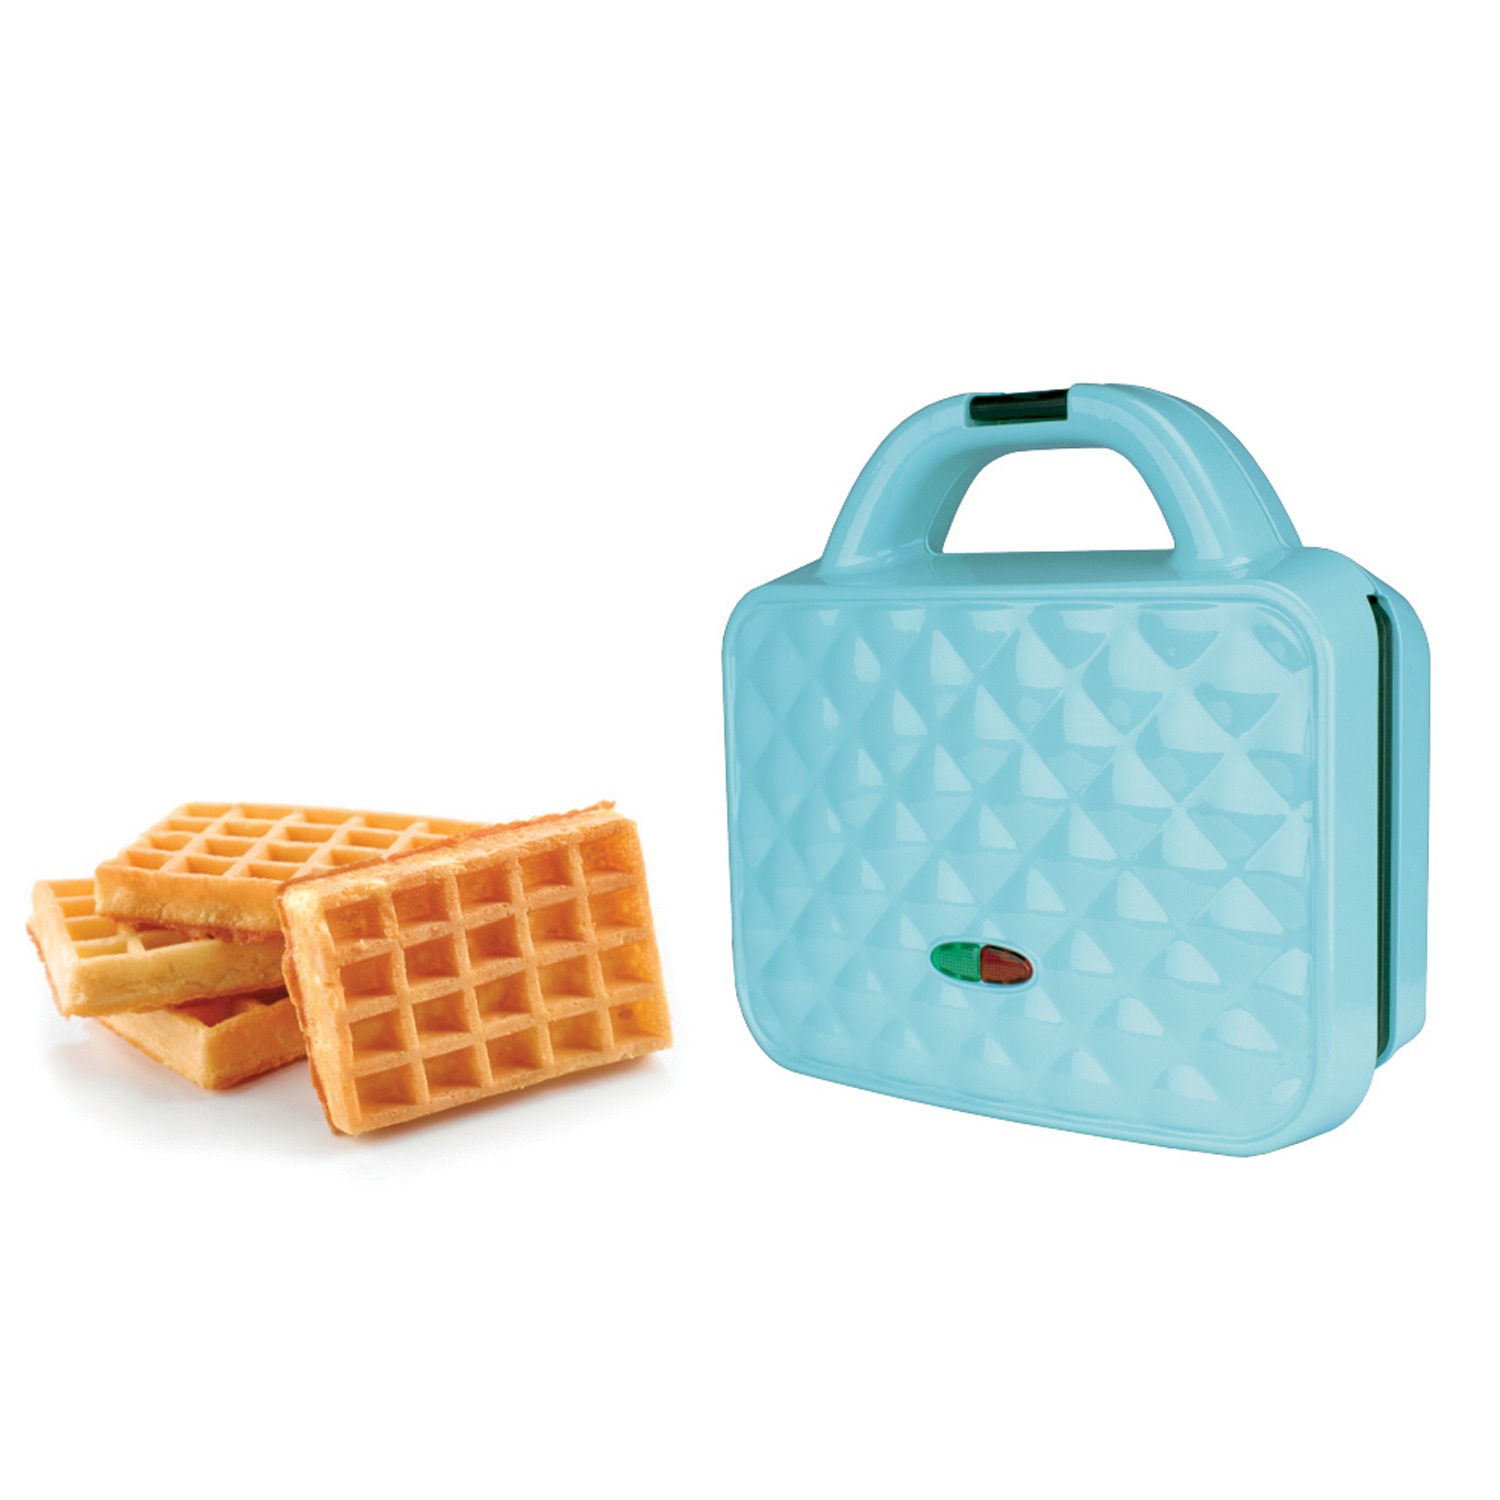 Brentwood Couture Purse Non-Stick Dual Waffle Maker in Blue with Indicator Lights - image 4 of 9